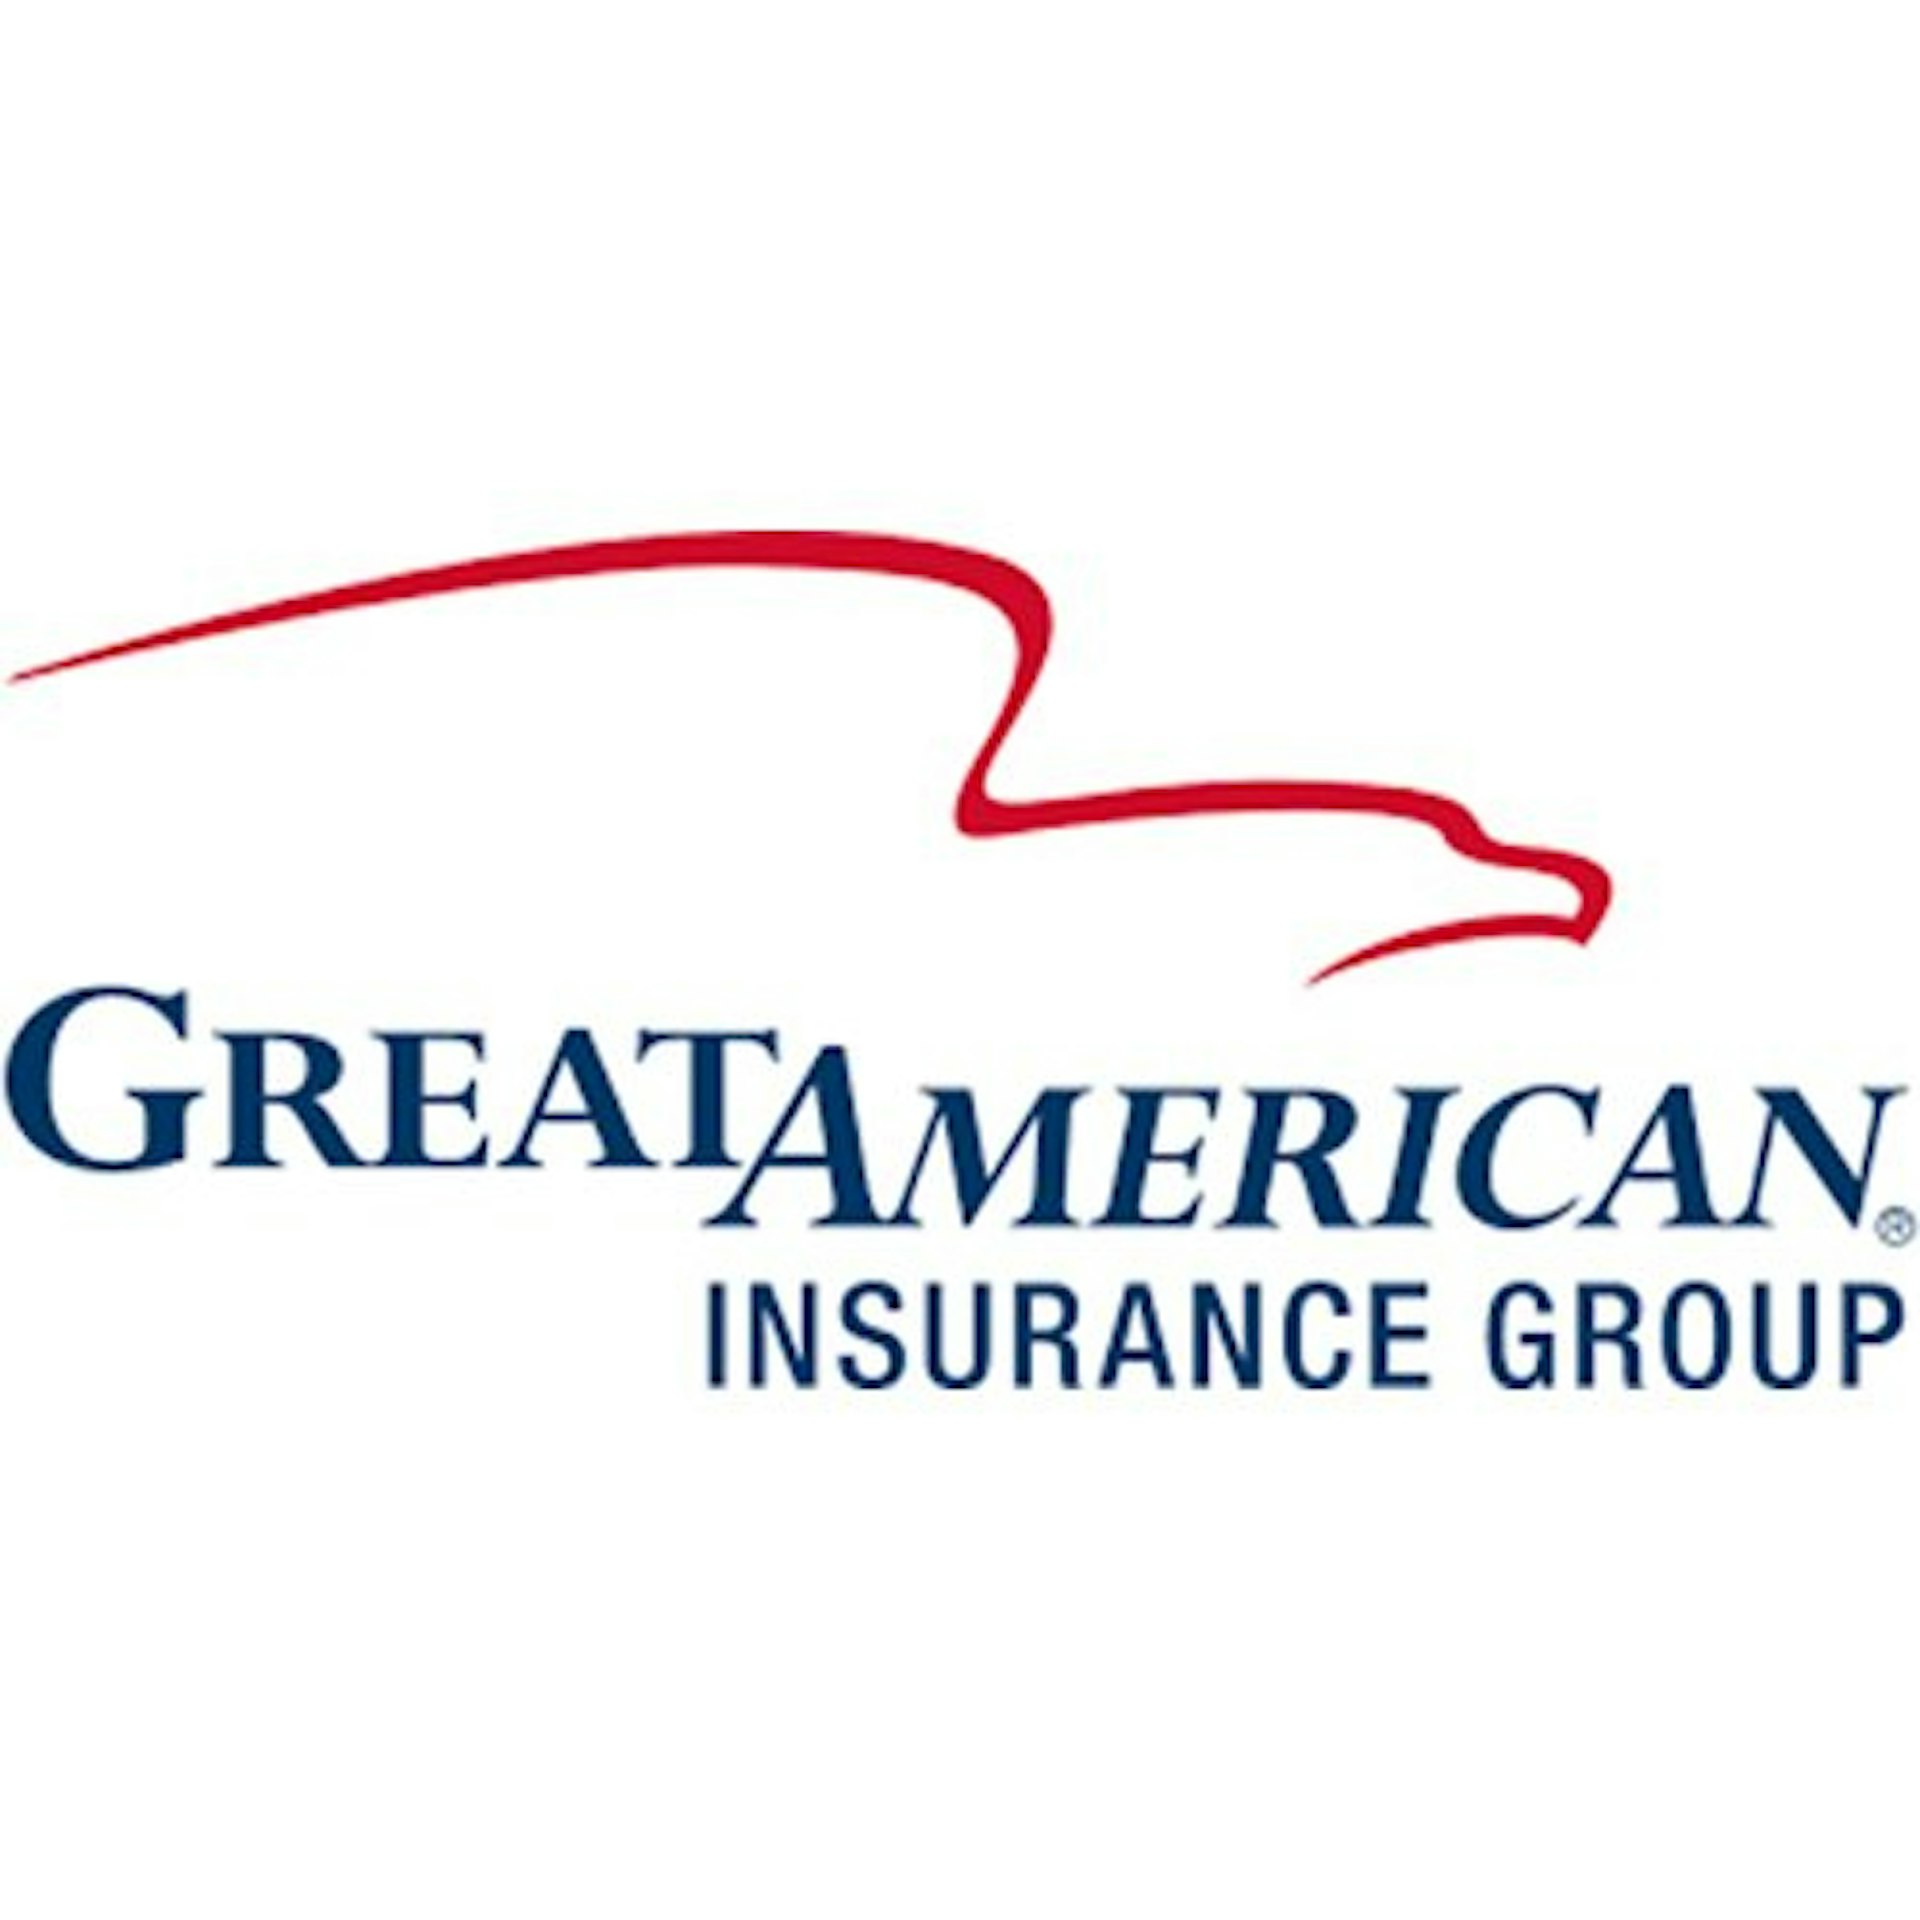 Geovera insurance claims information